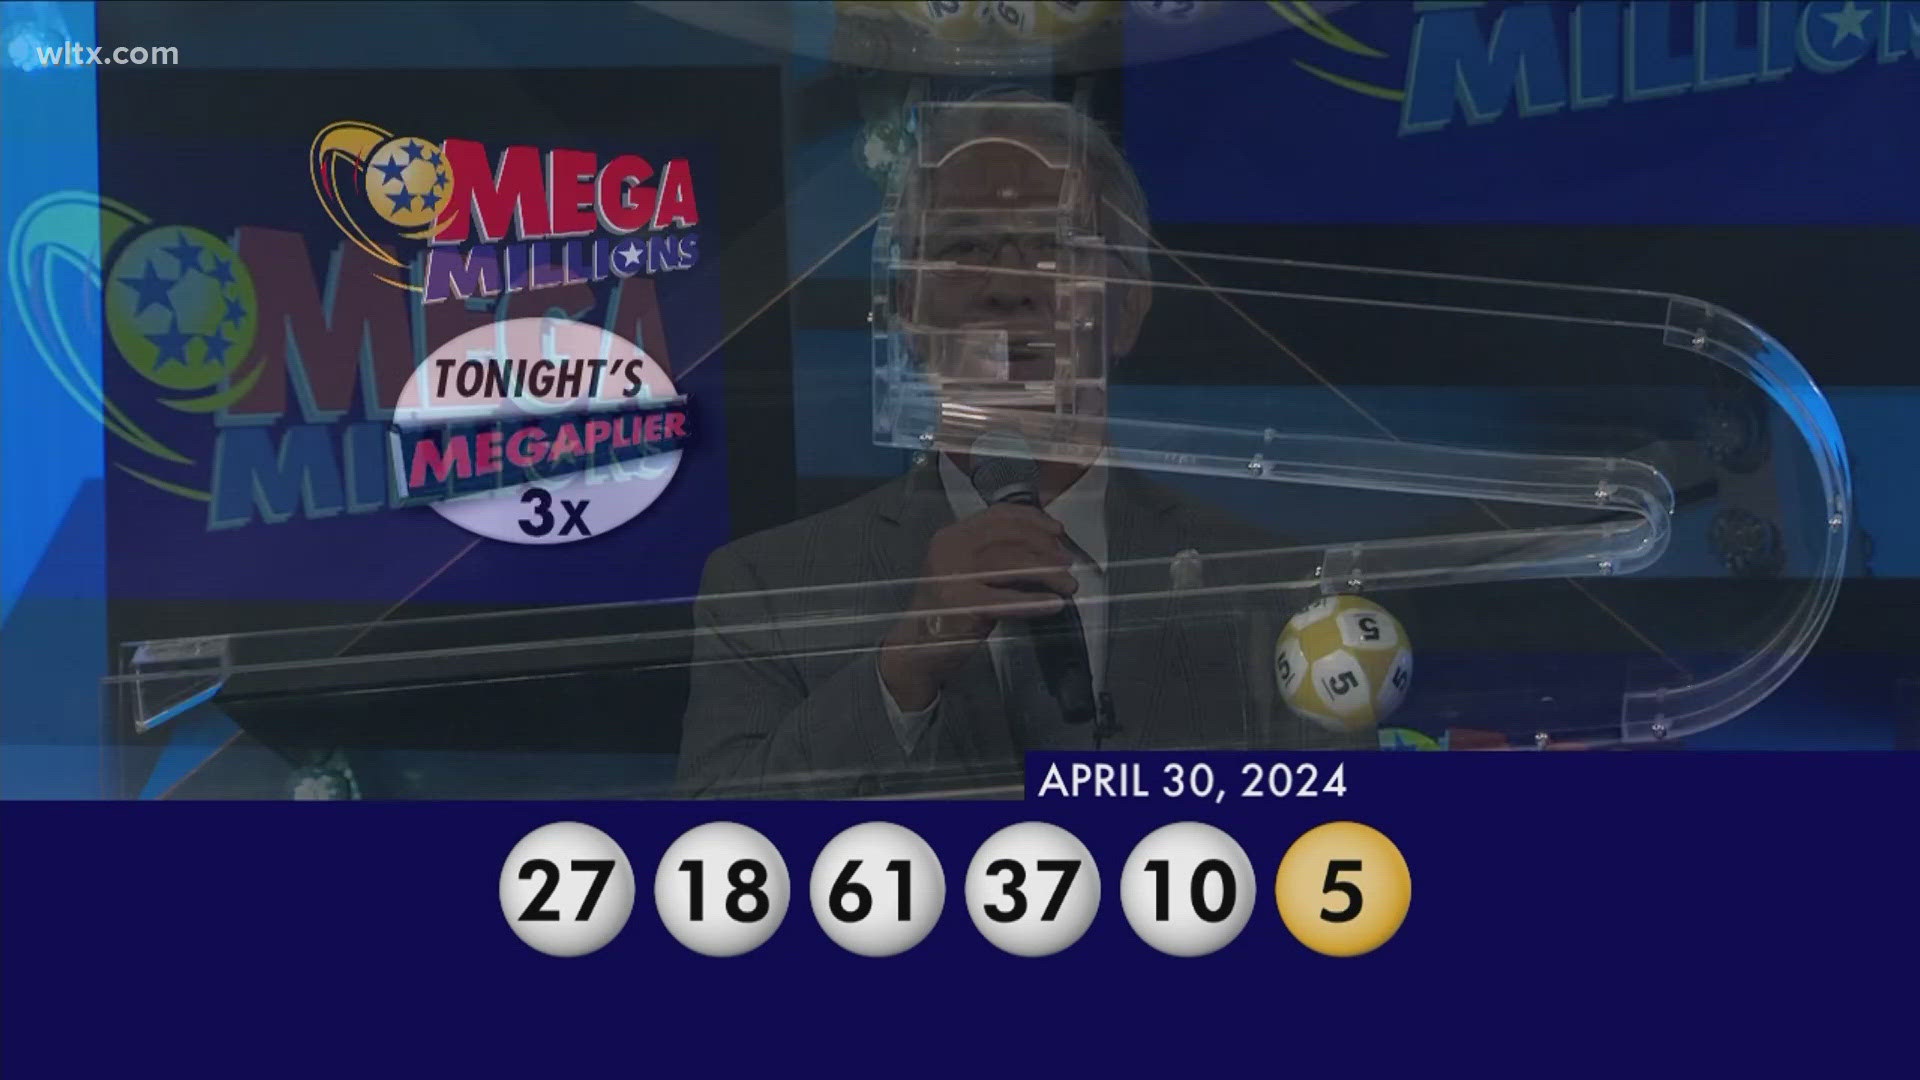 Here are the winning MegaMillions numbers for April 30, 2024.